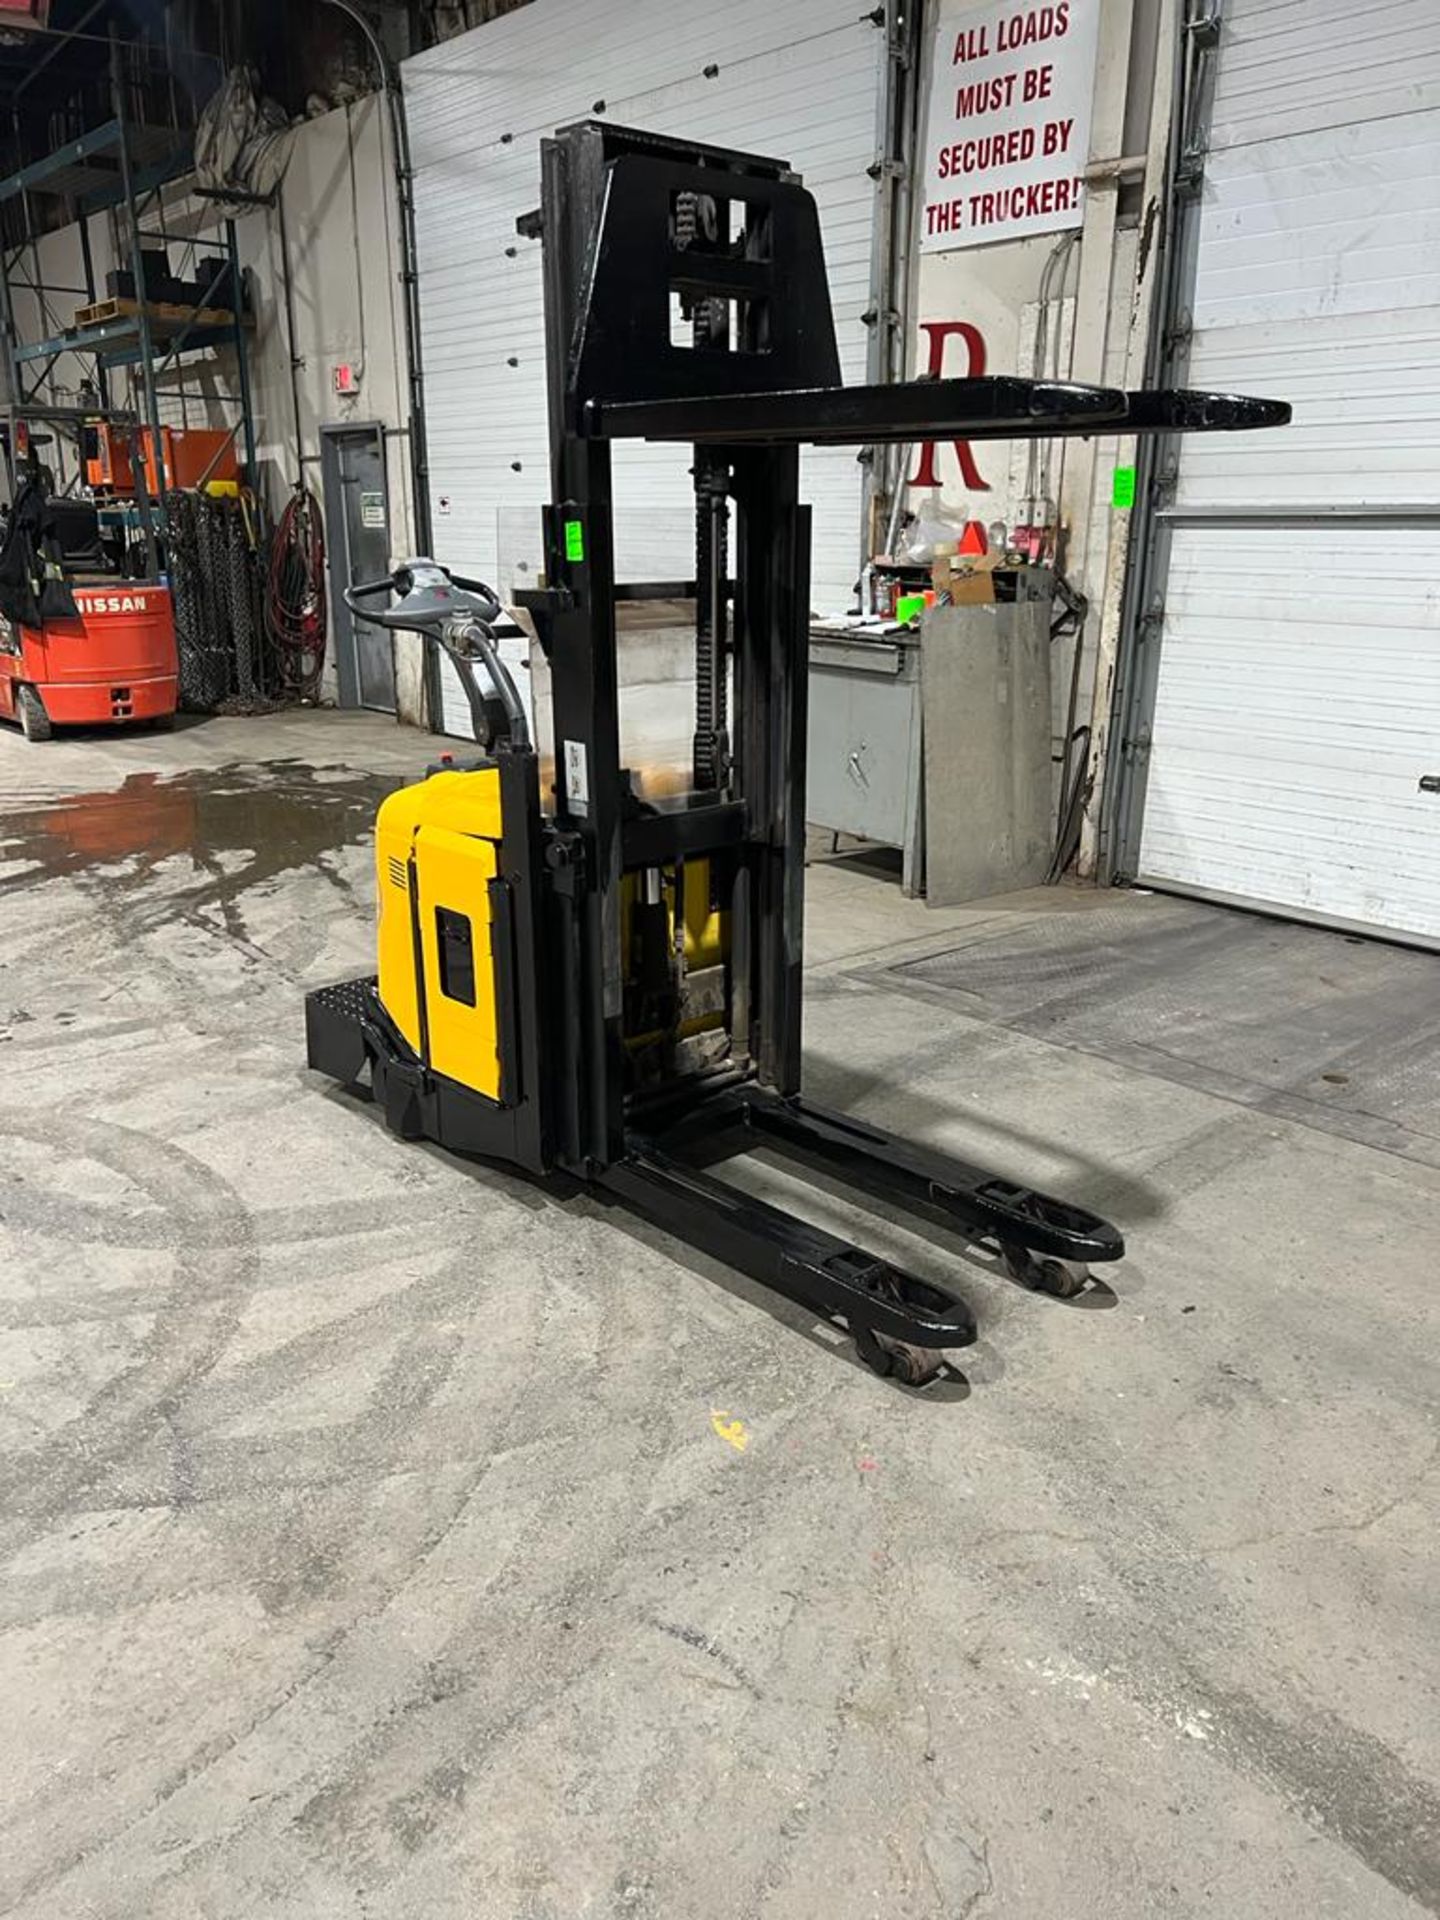 NICE BT Pallet Stacker RIDE ON 5000lbs capacity electric Powered Pallet Cart 24V with LOW HOURS FREE